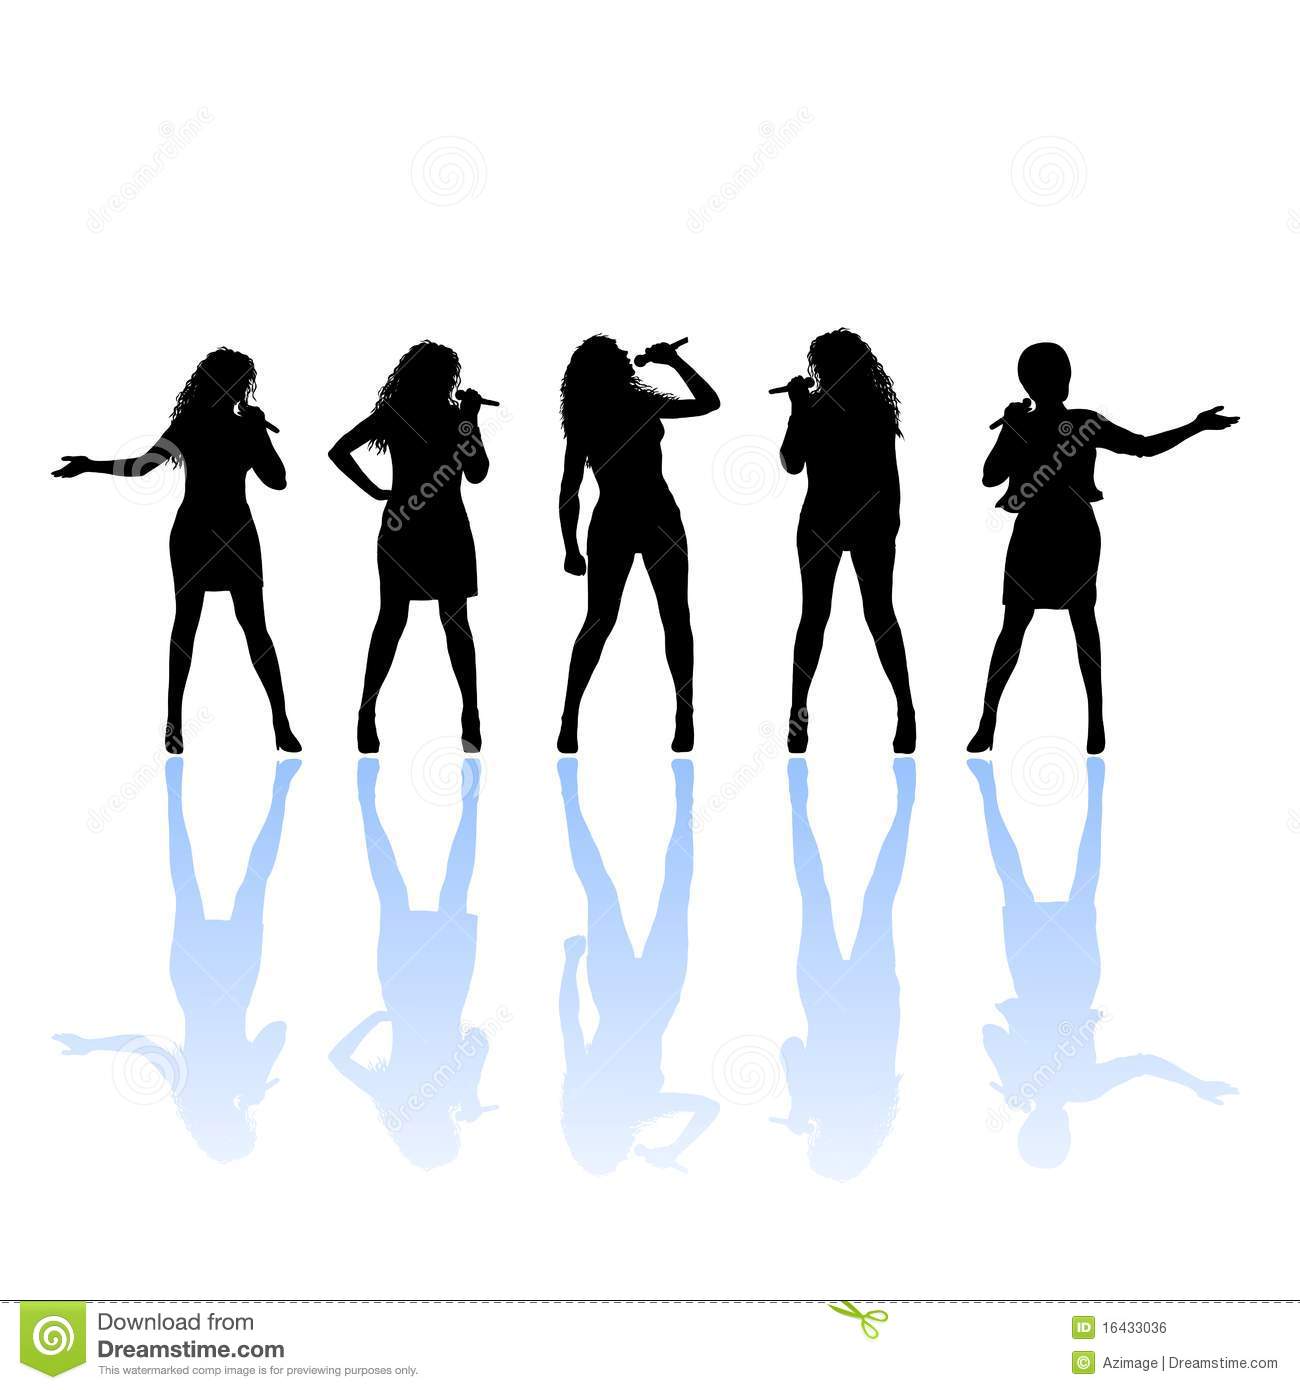 Silhouette Of Female Singer Royalty Free Stock Image   Image  16433036